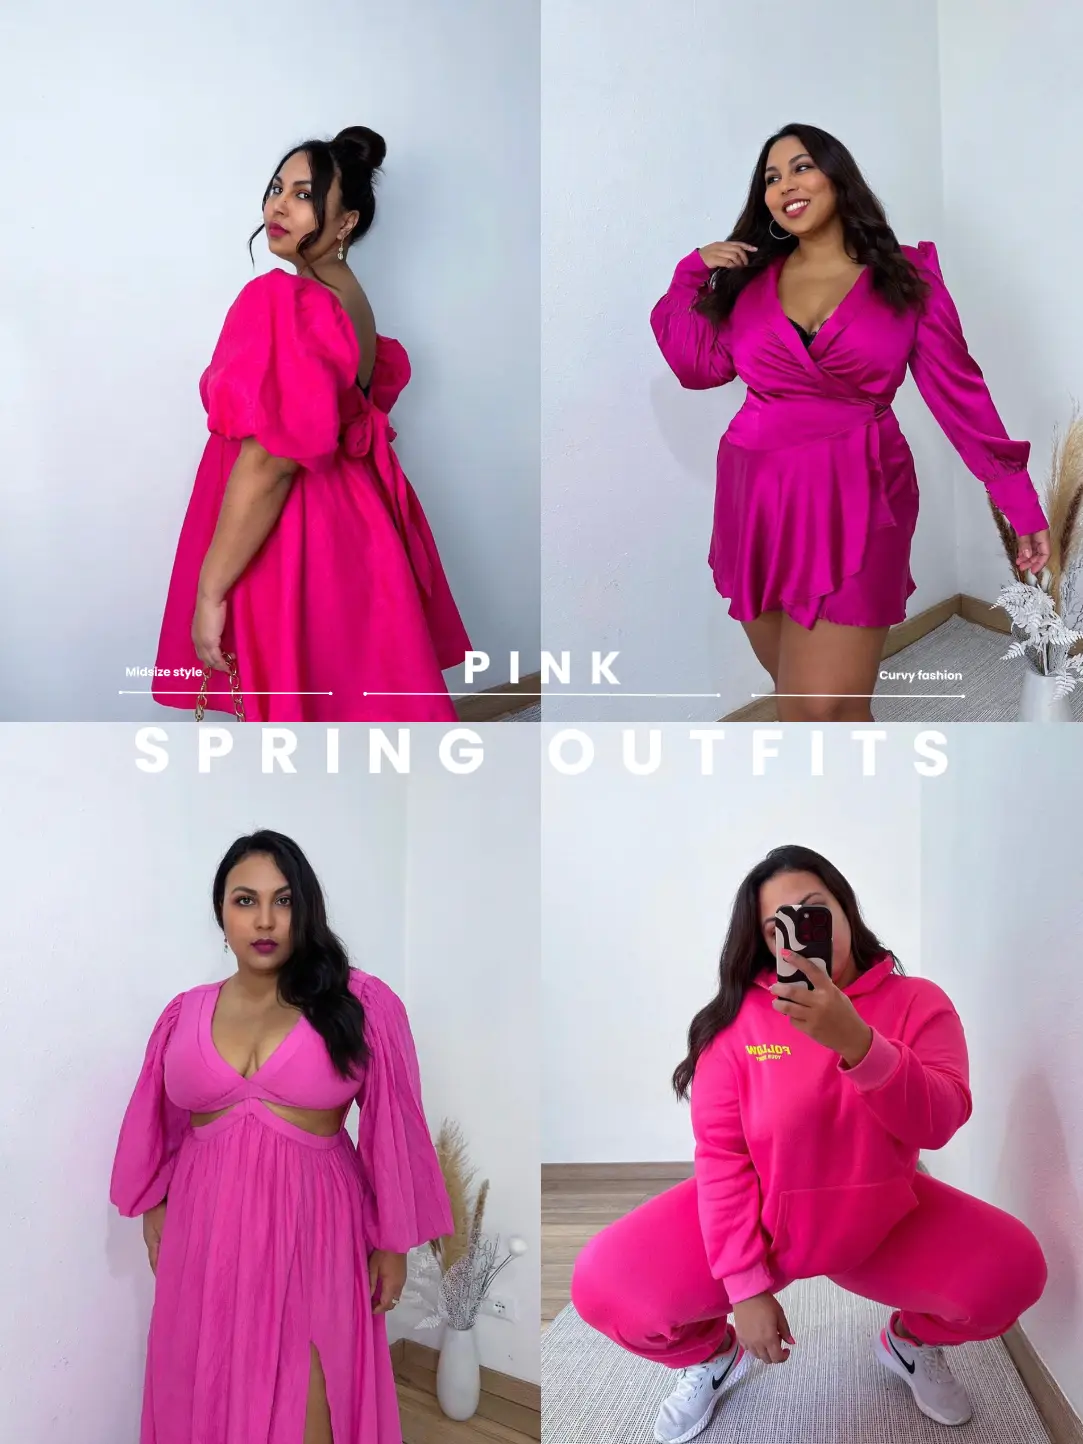 PINK SPRING OUTFITS - midsize fashion, Gallery posted by Stuff.she.likes